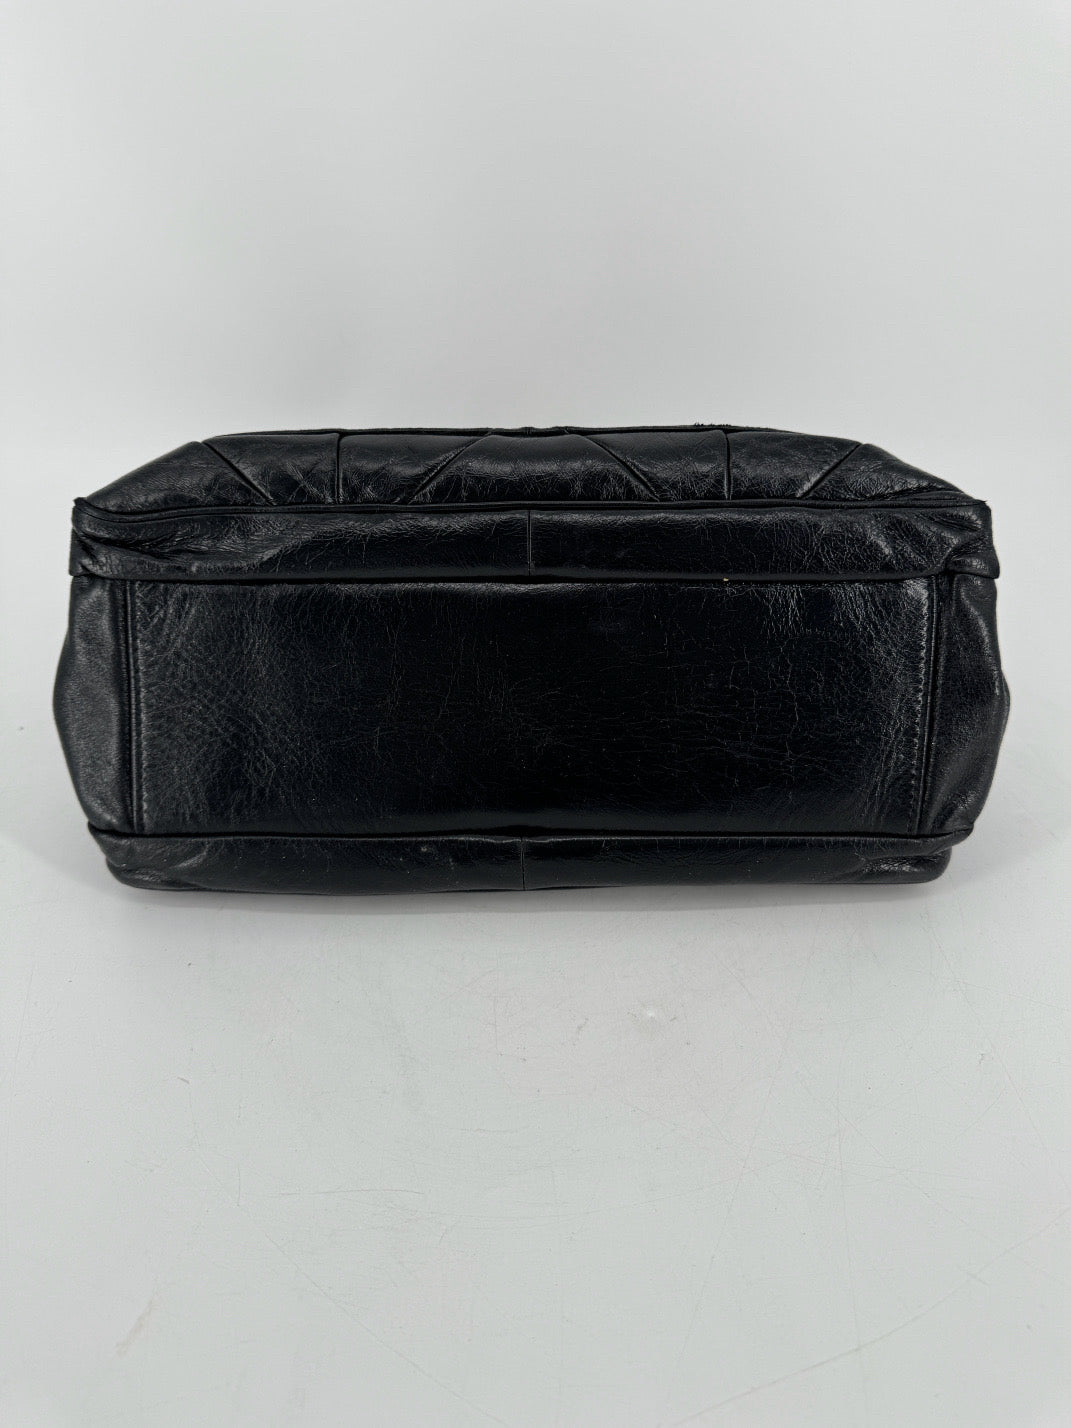 MARC JACOBS Black Leather Quilted Chainlink Purse